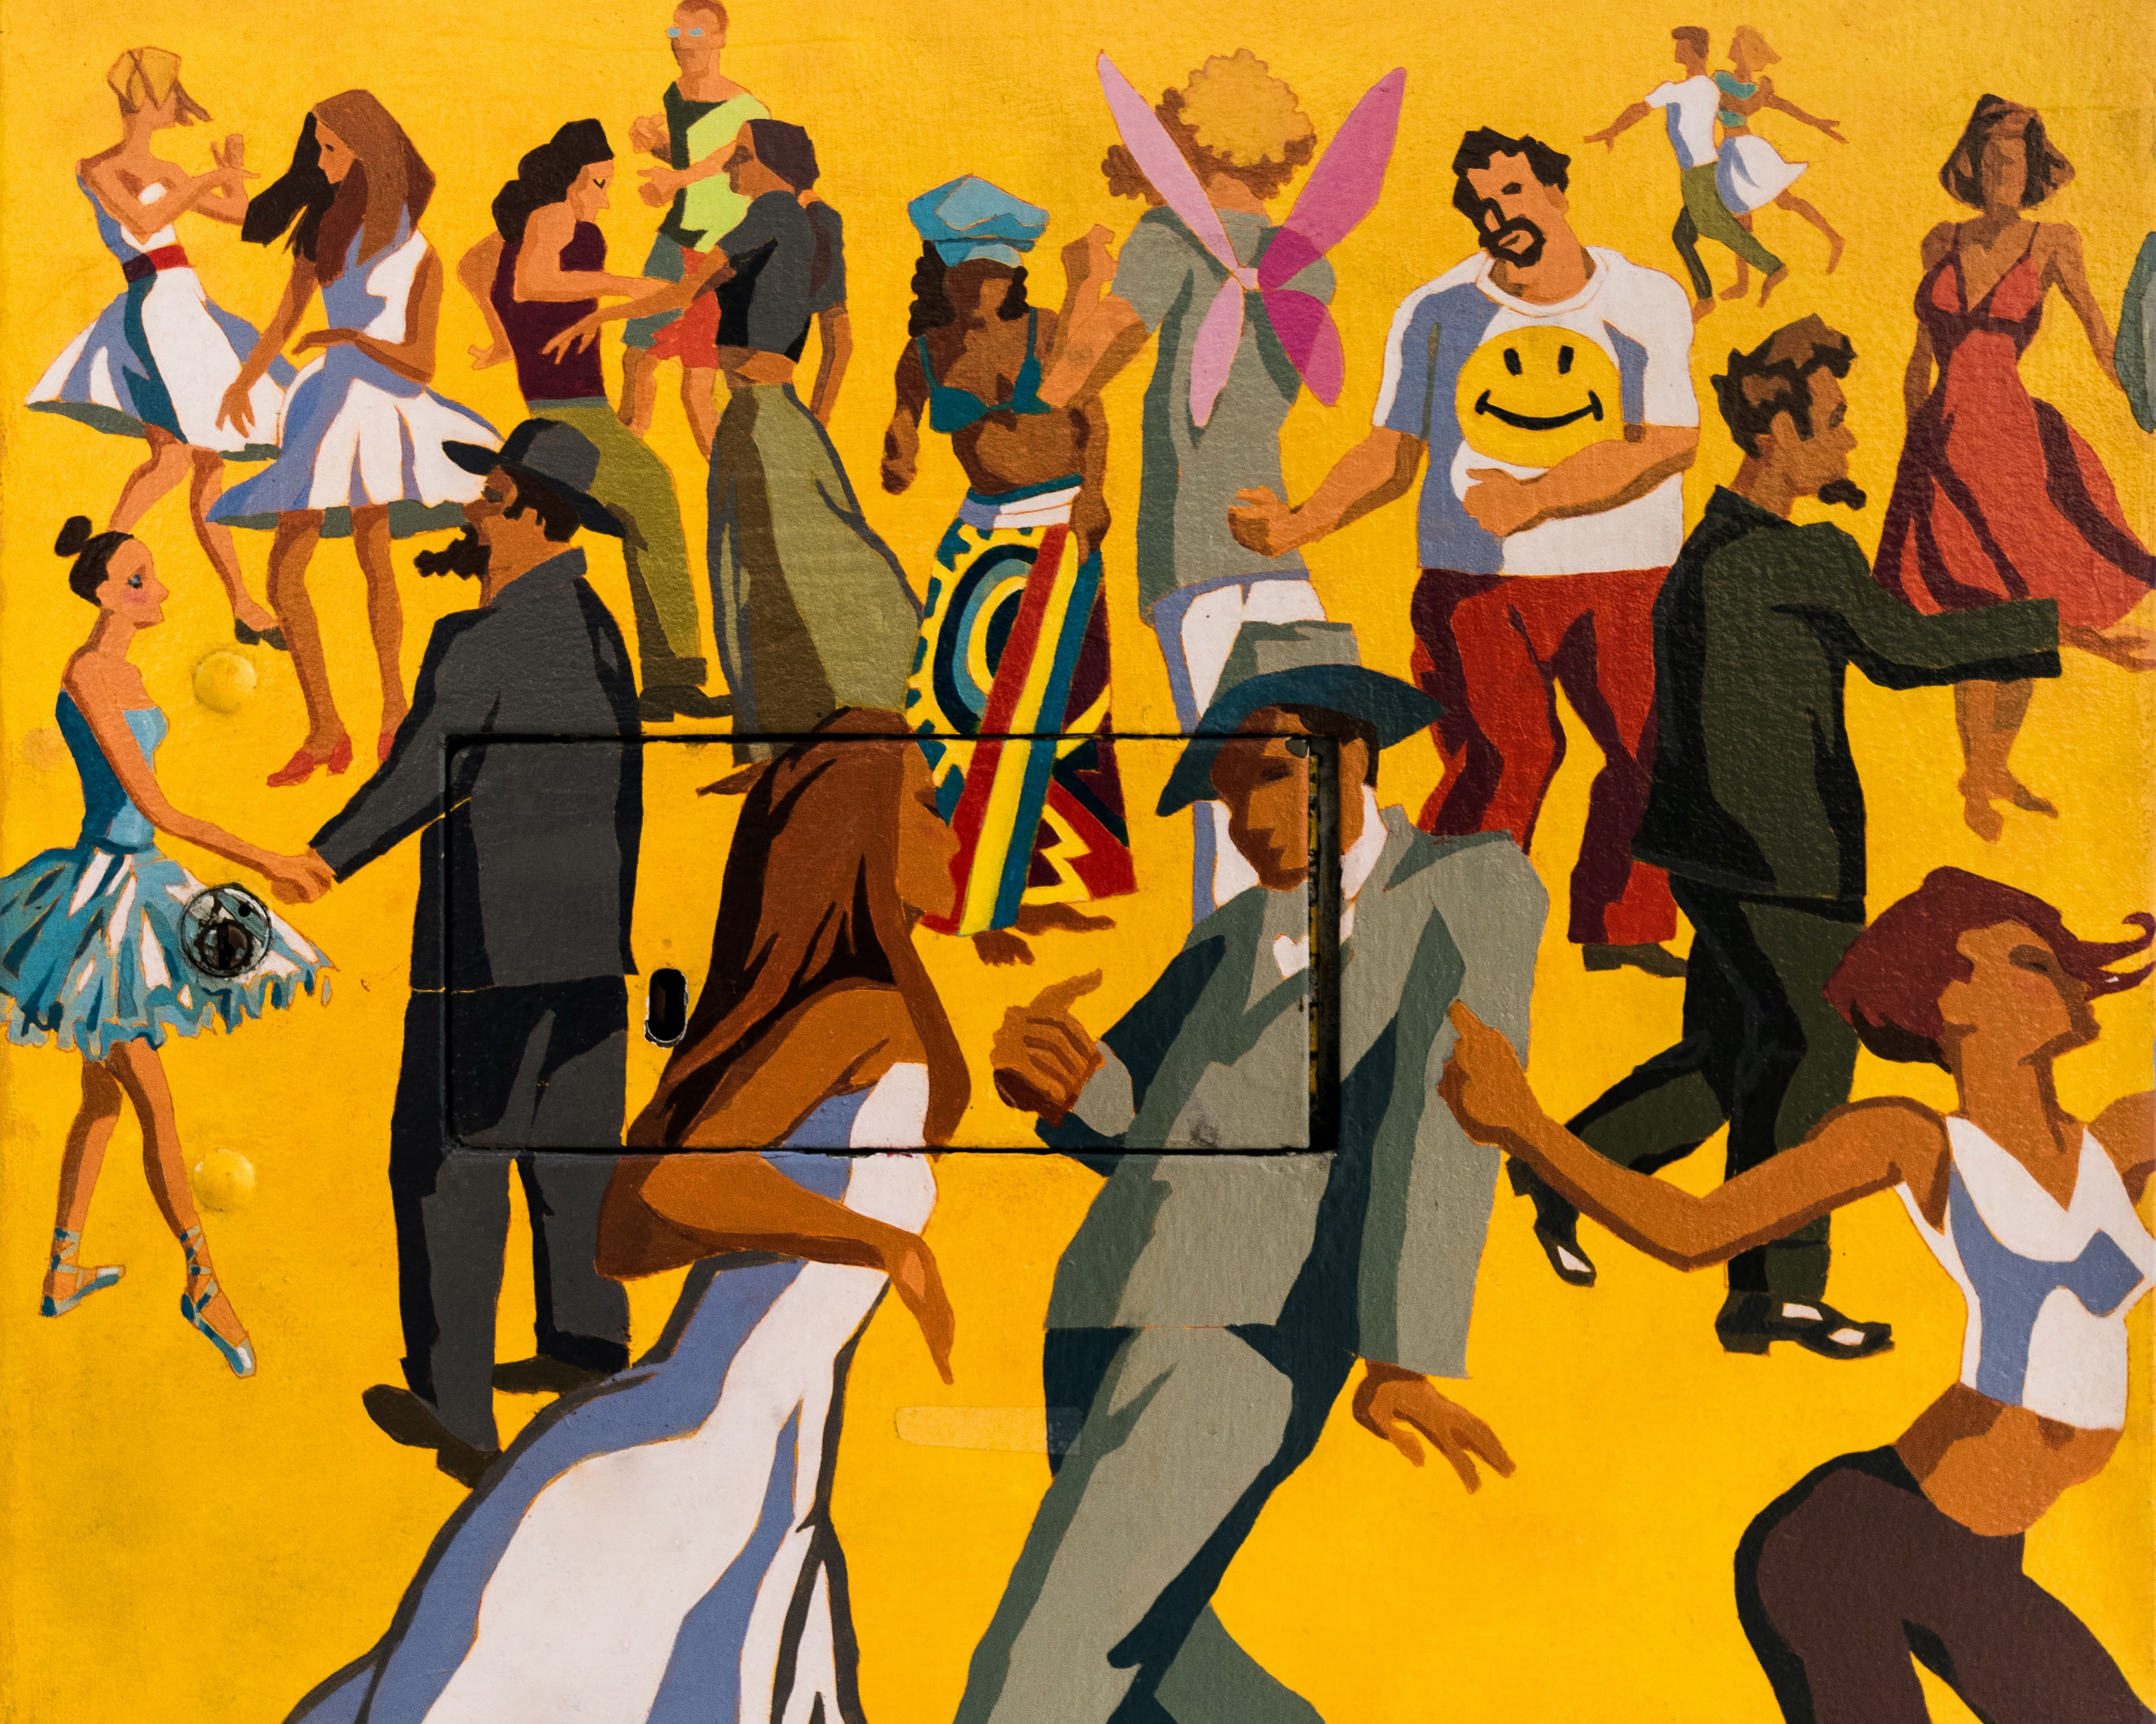 Illustration of many different people of many different backgrounds walking in multiple directions on a yellow background.